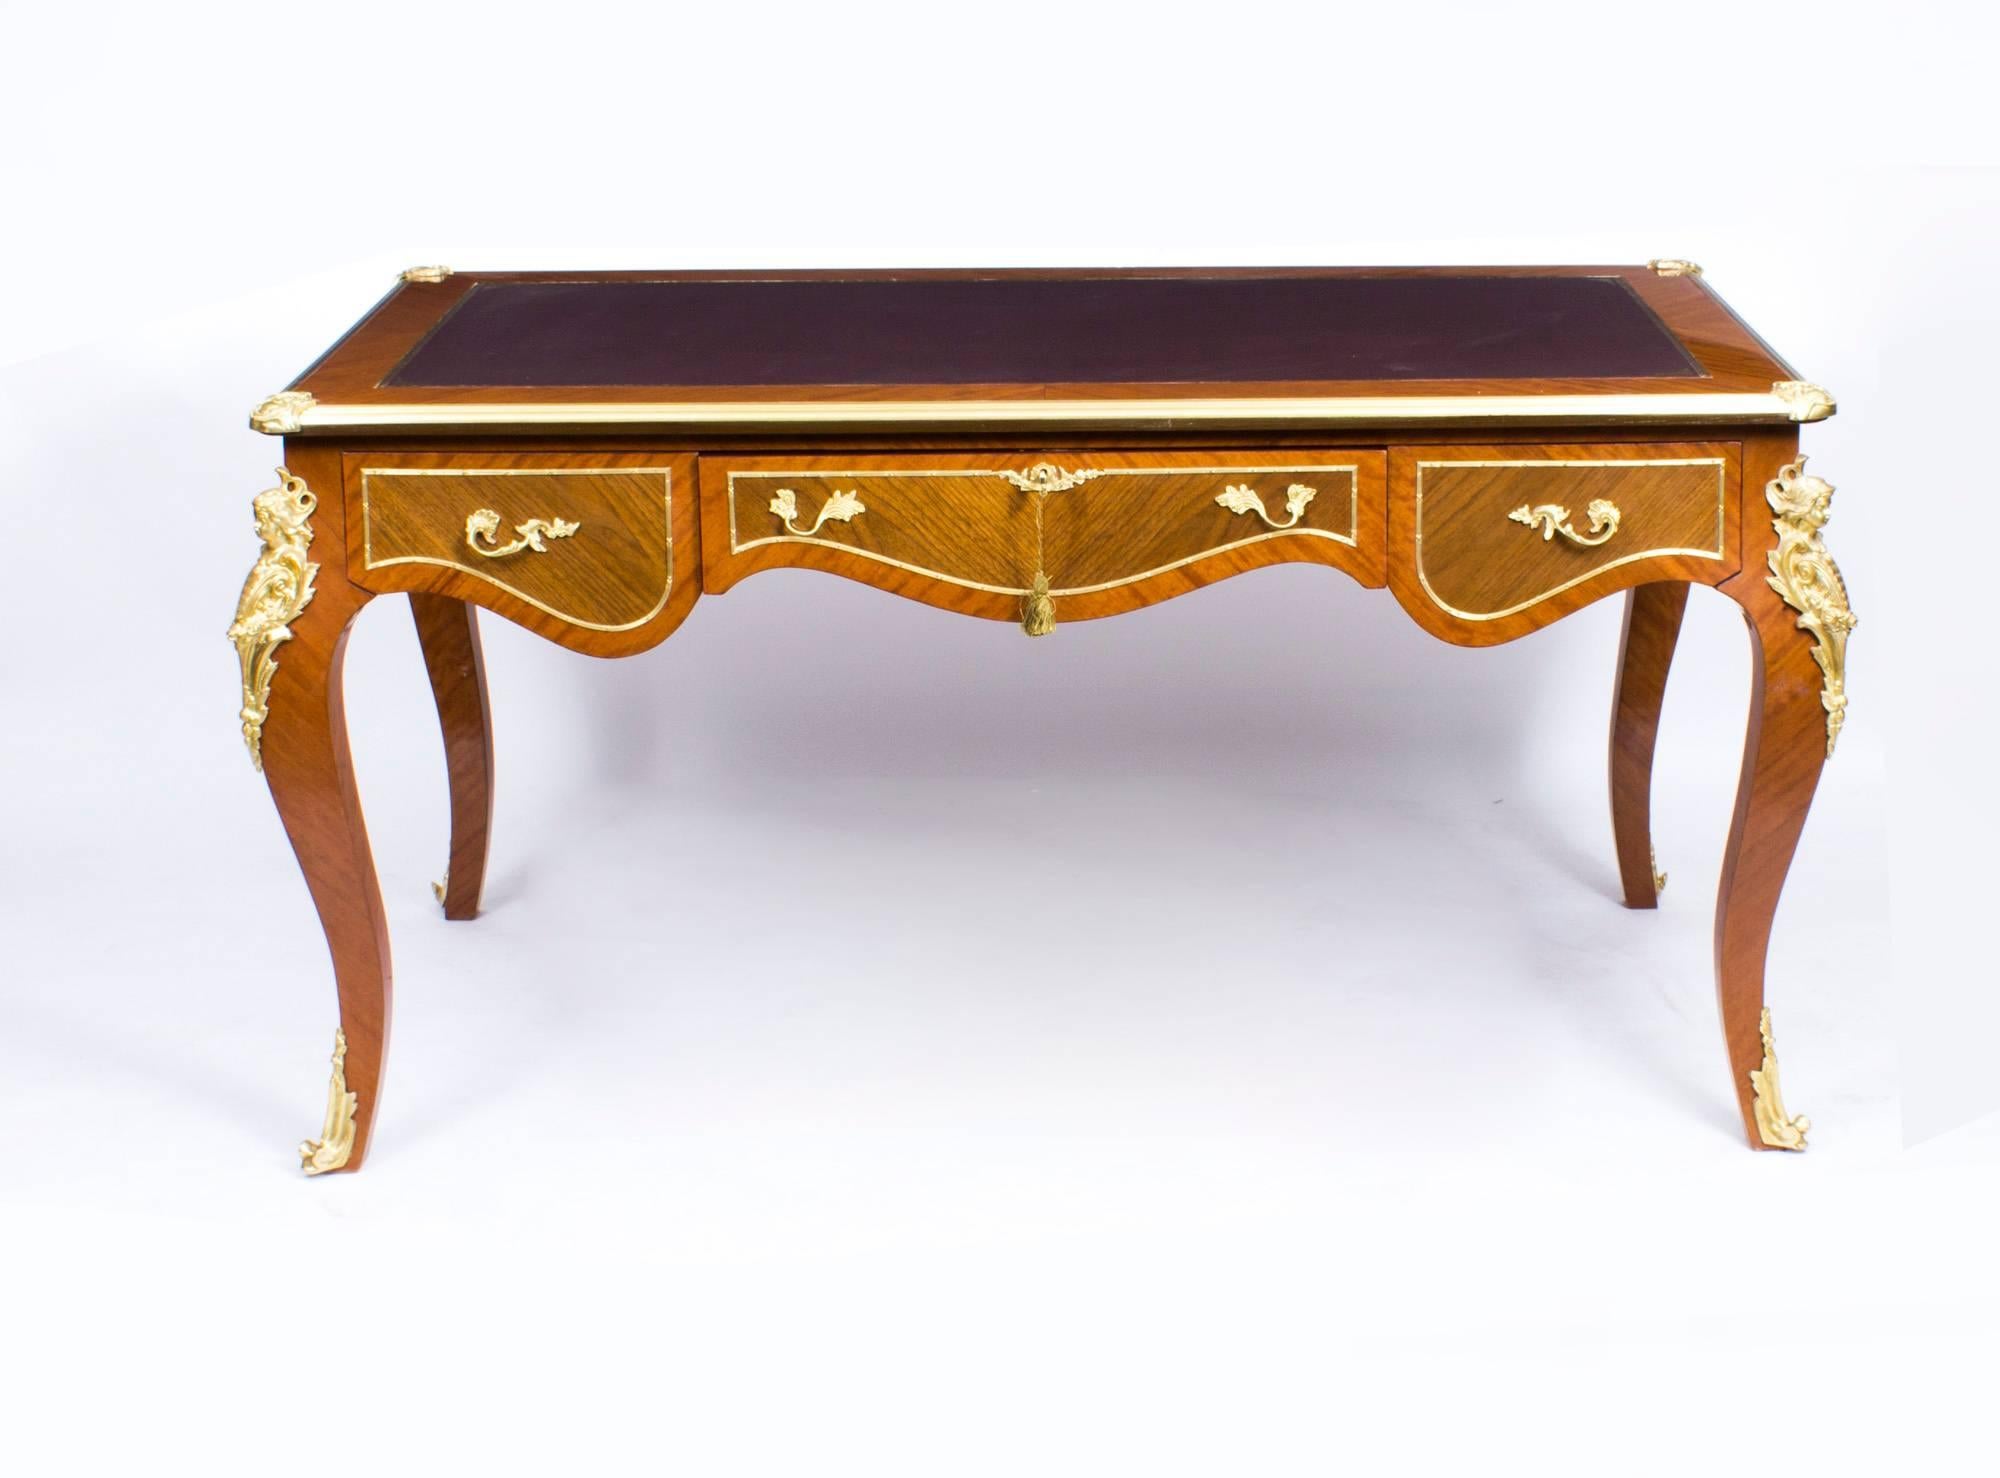 This is a sublime kingwood Louis Revival writing table, dating from the last quarter of the 20th century.

The desk is crafted from beautiful kingwood with elegant rosewood panels and gilded bronze mounts. It features a striking leather writing